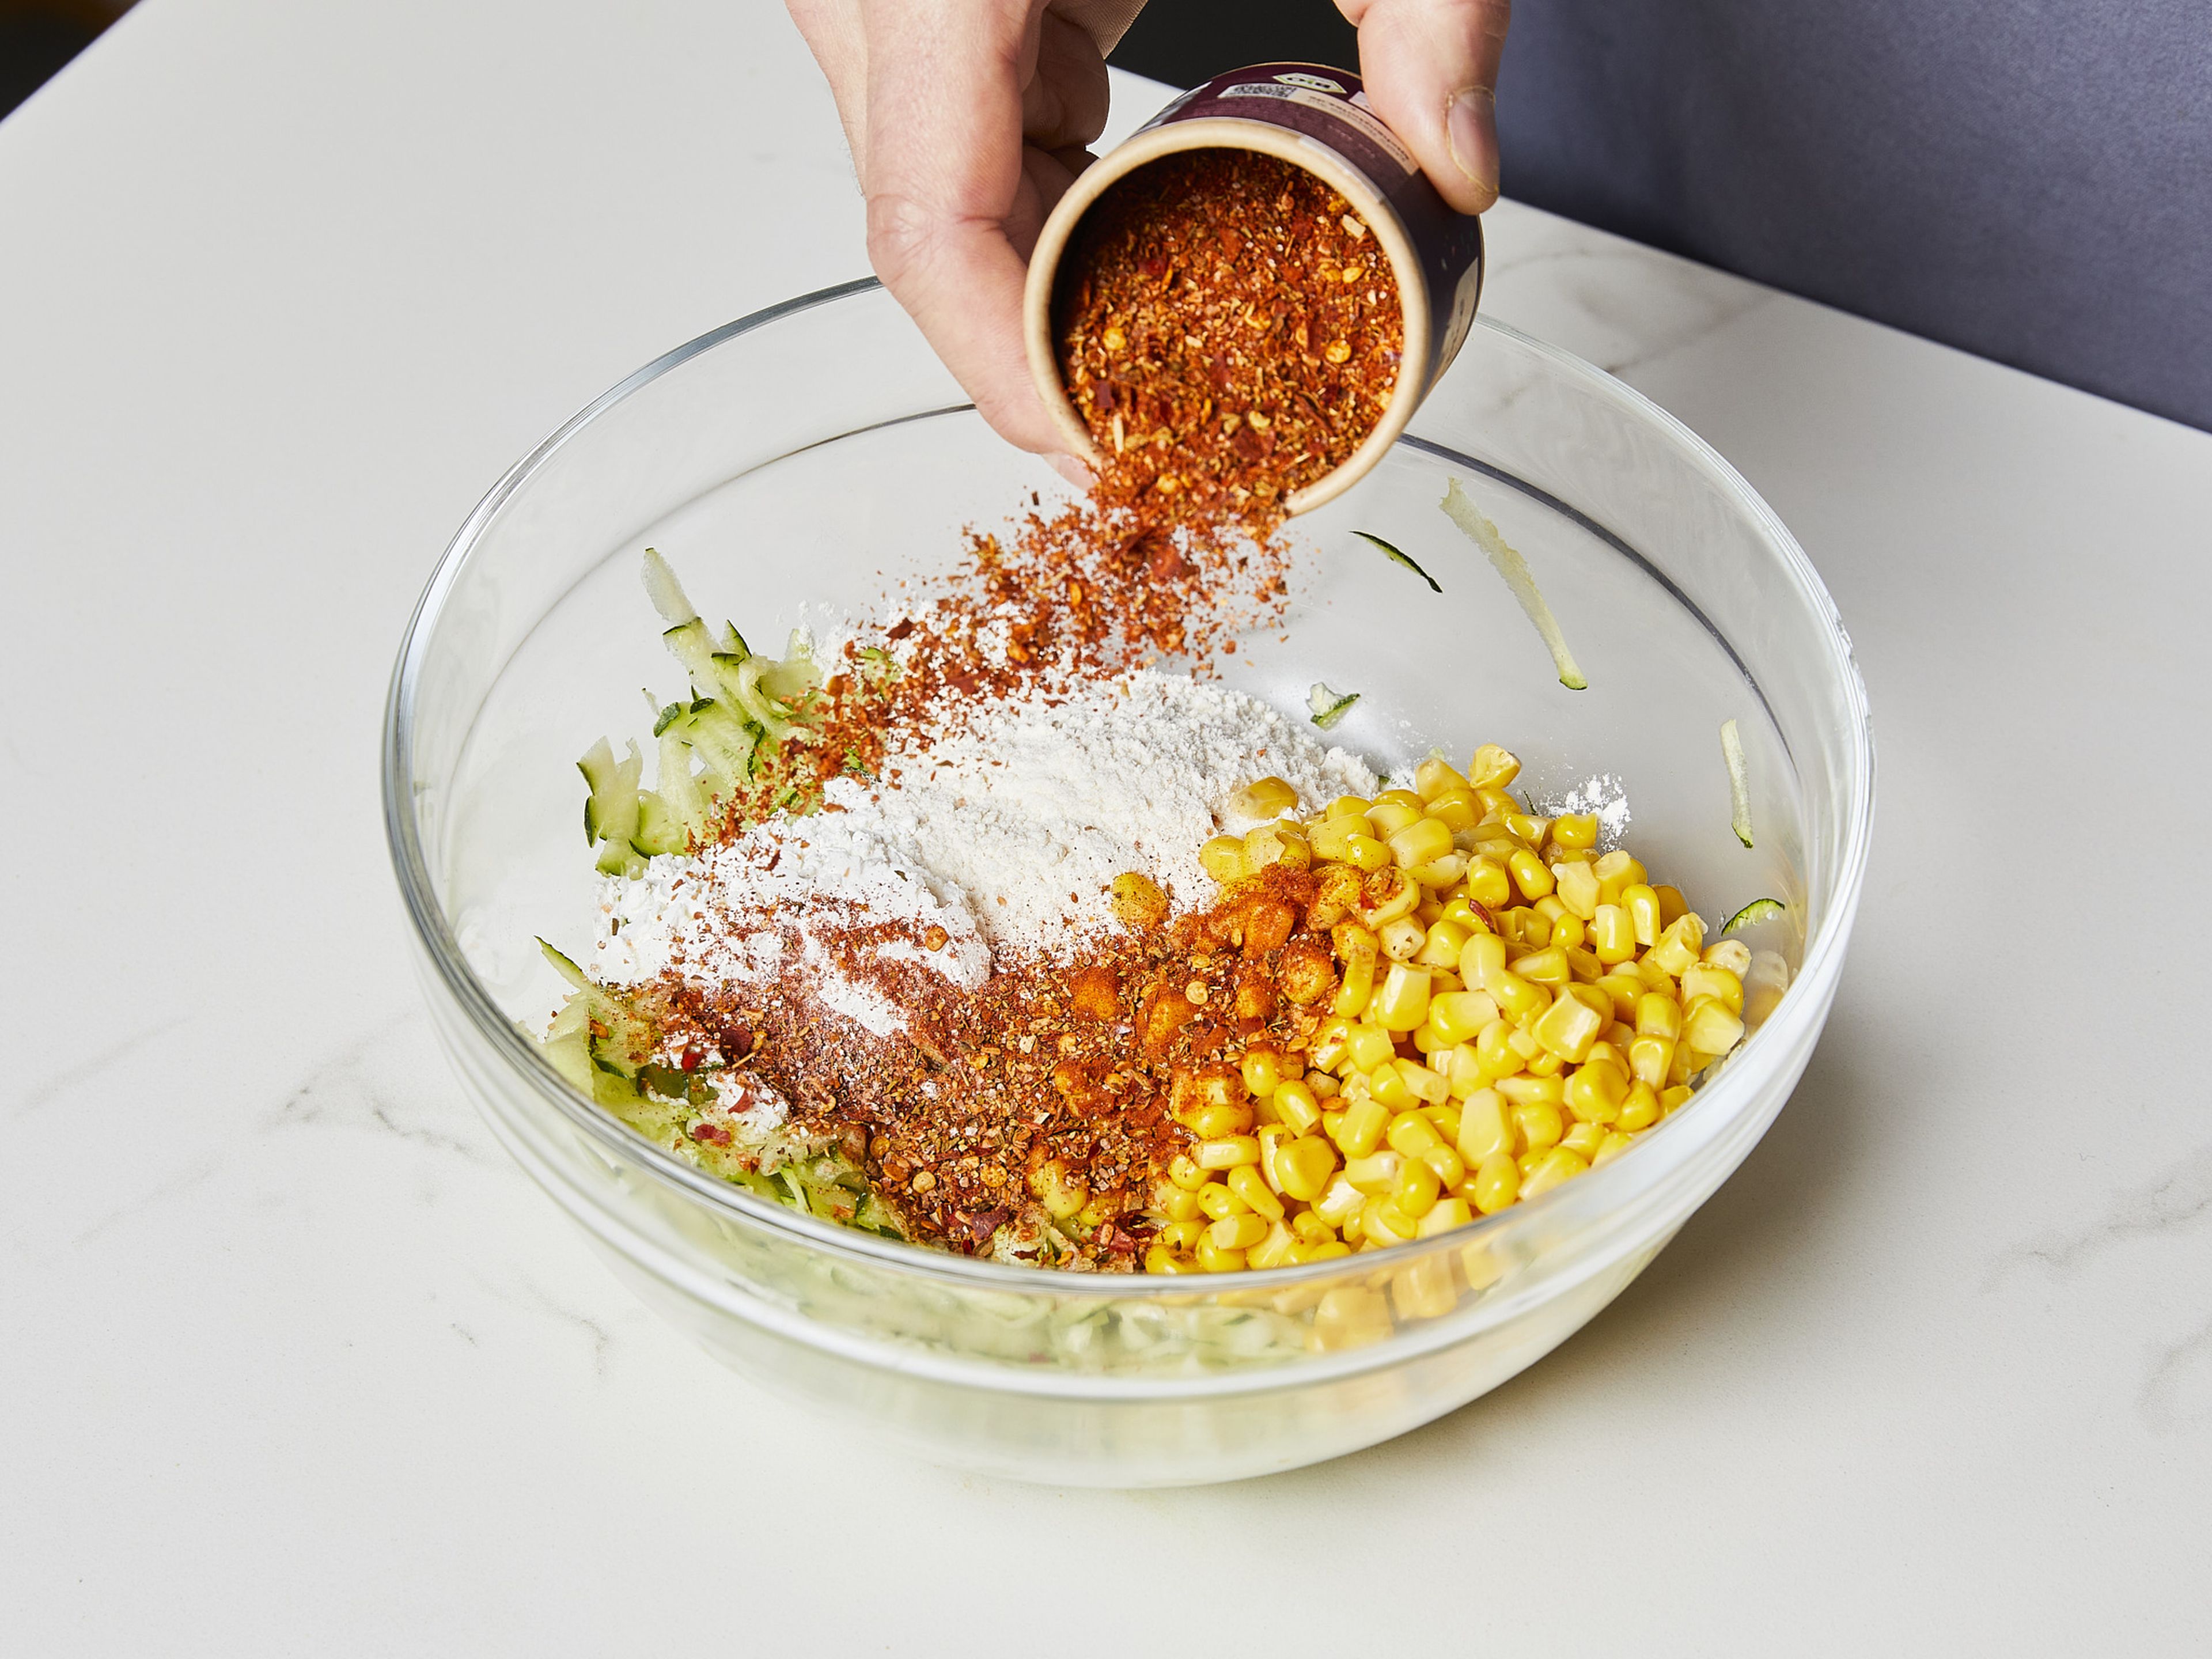 Add drained corn kernels to the bowl with the grated zucchini together with the liquid. Fold in the flour, cornstarch, and our VIVA LA SPICE seasoning. Mix well until a batter forms.